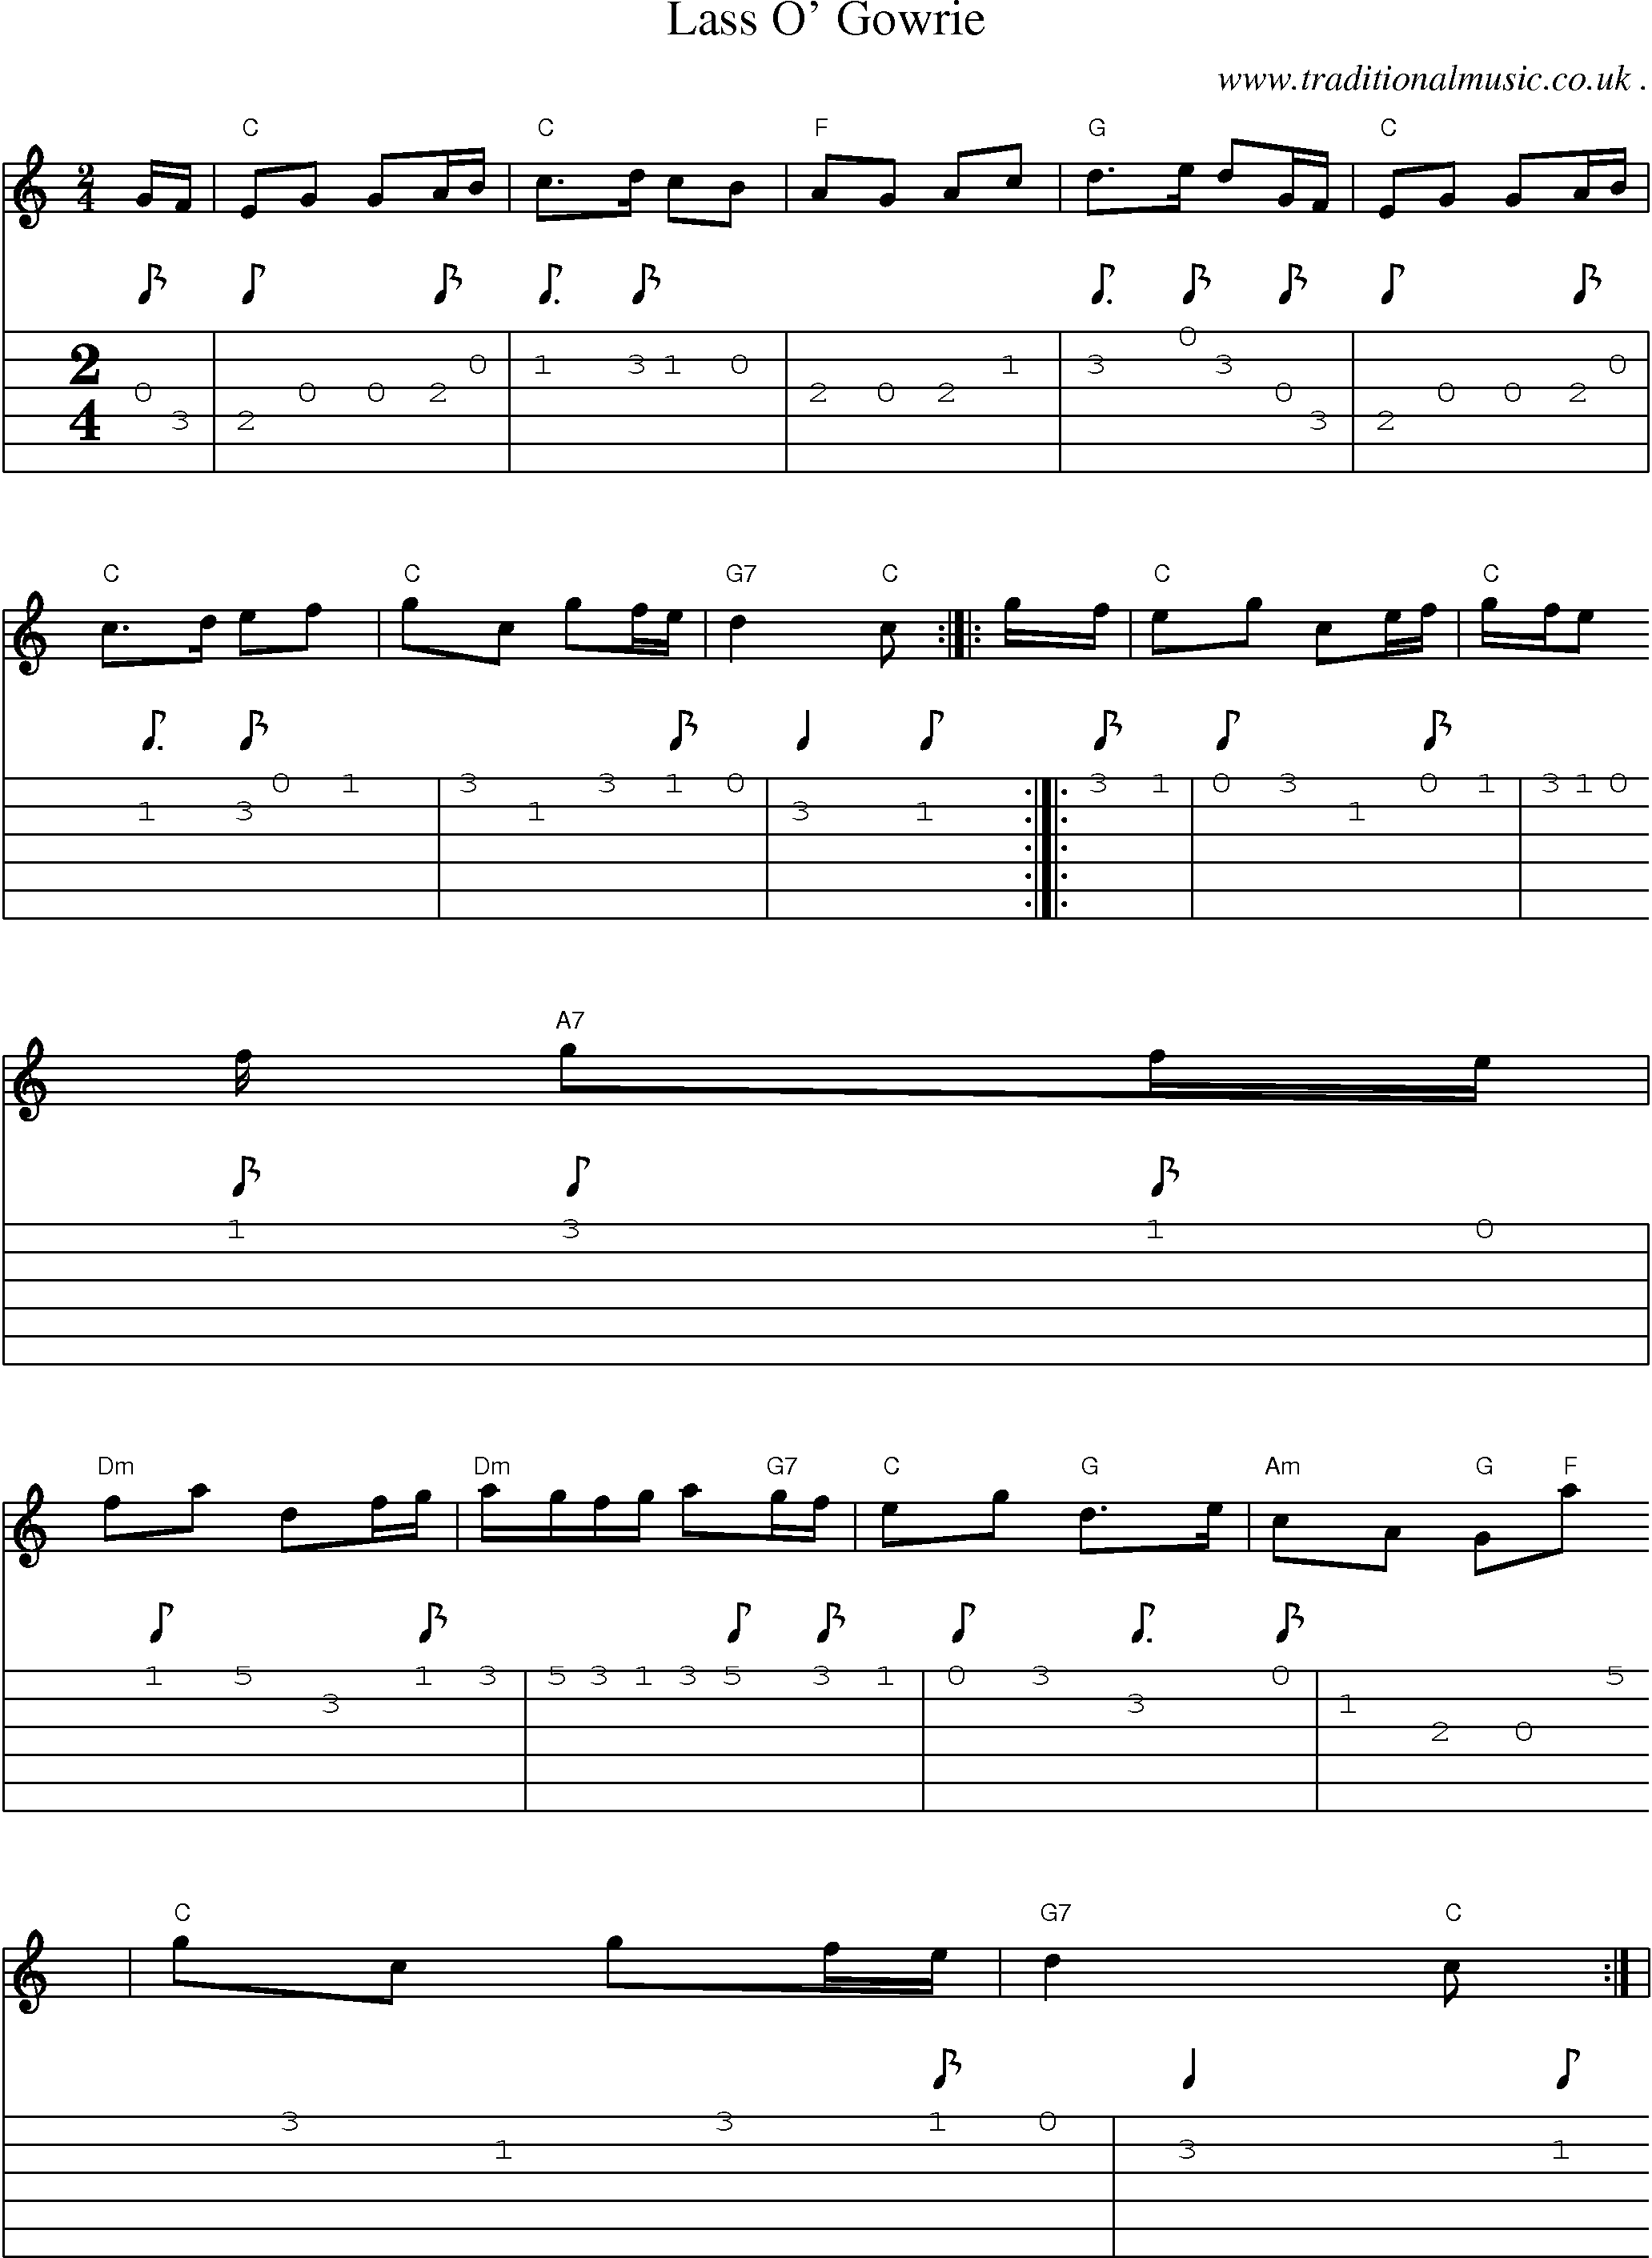 Sheet-music  score, Chords and Guitar Tabs for Lass O Gowrie